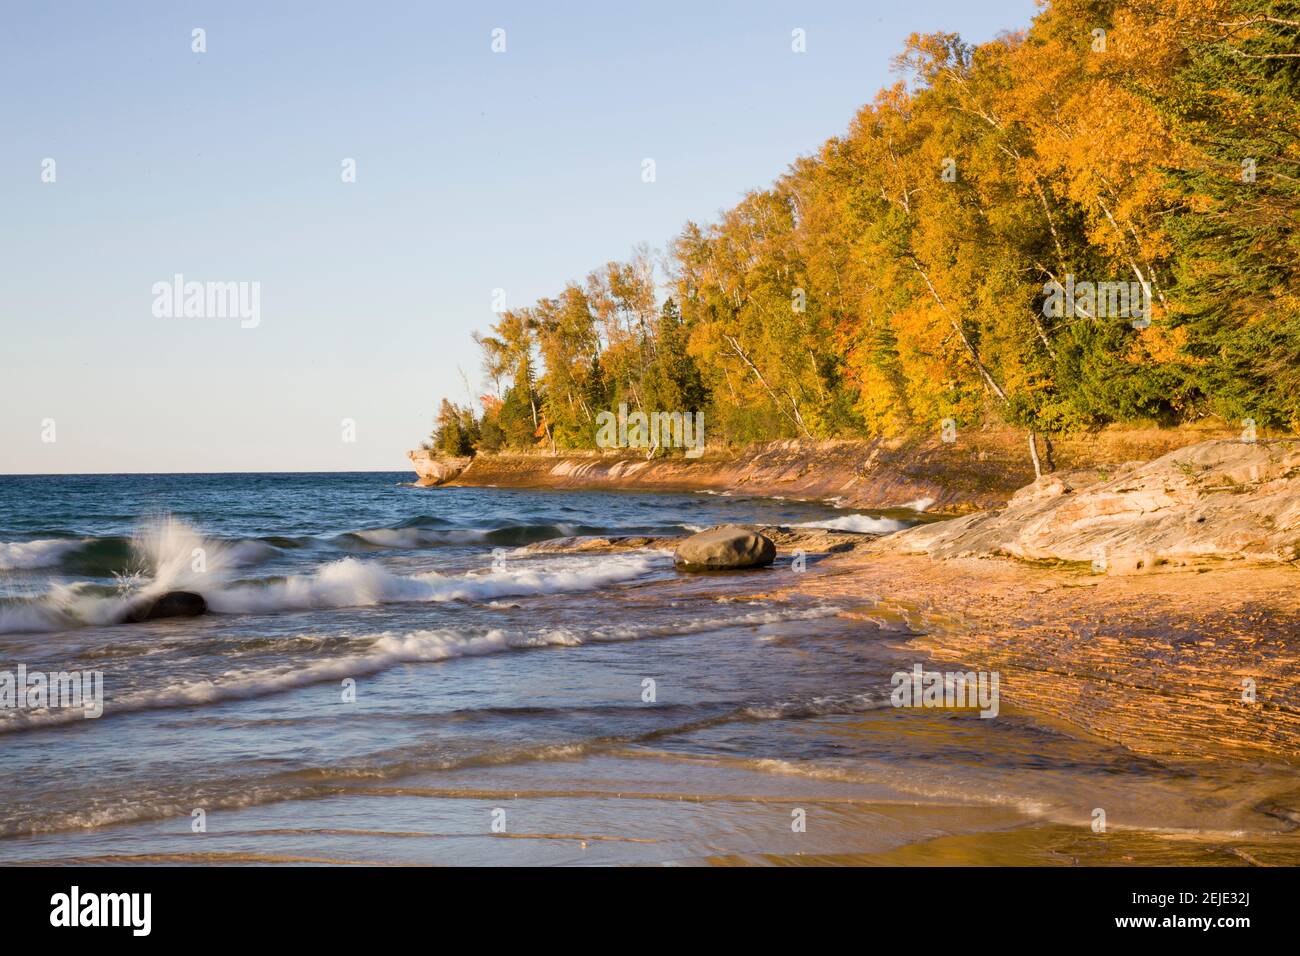 Autumn trees on the coast, Miners Beach, Pictured Rocks National Lakeshore, Alger County, Michigan, USA Stock Photo